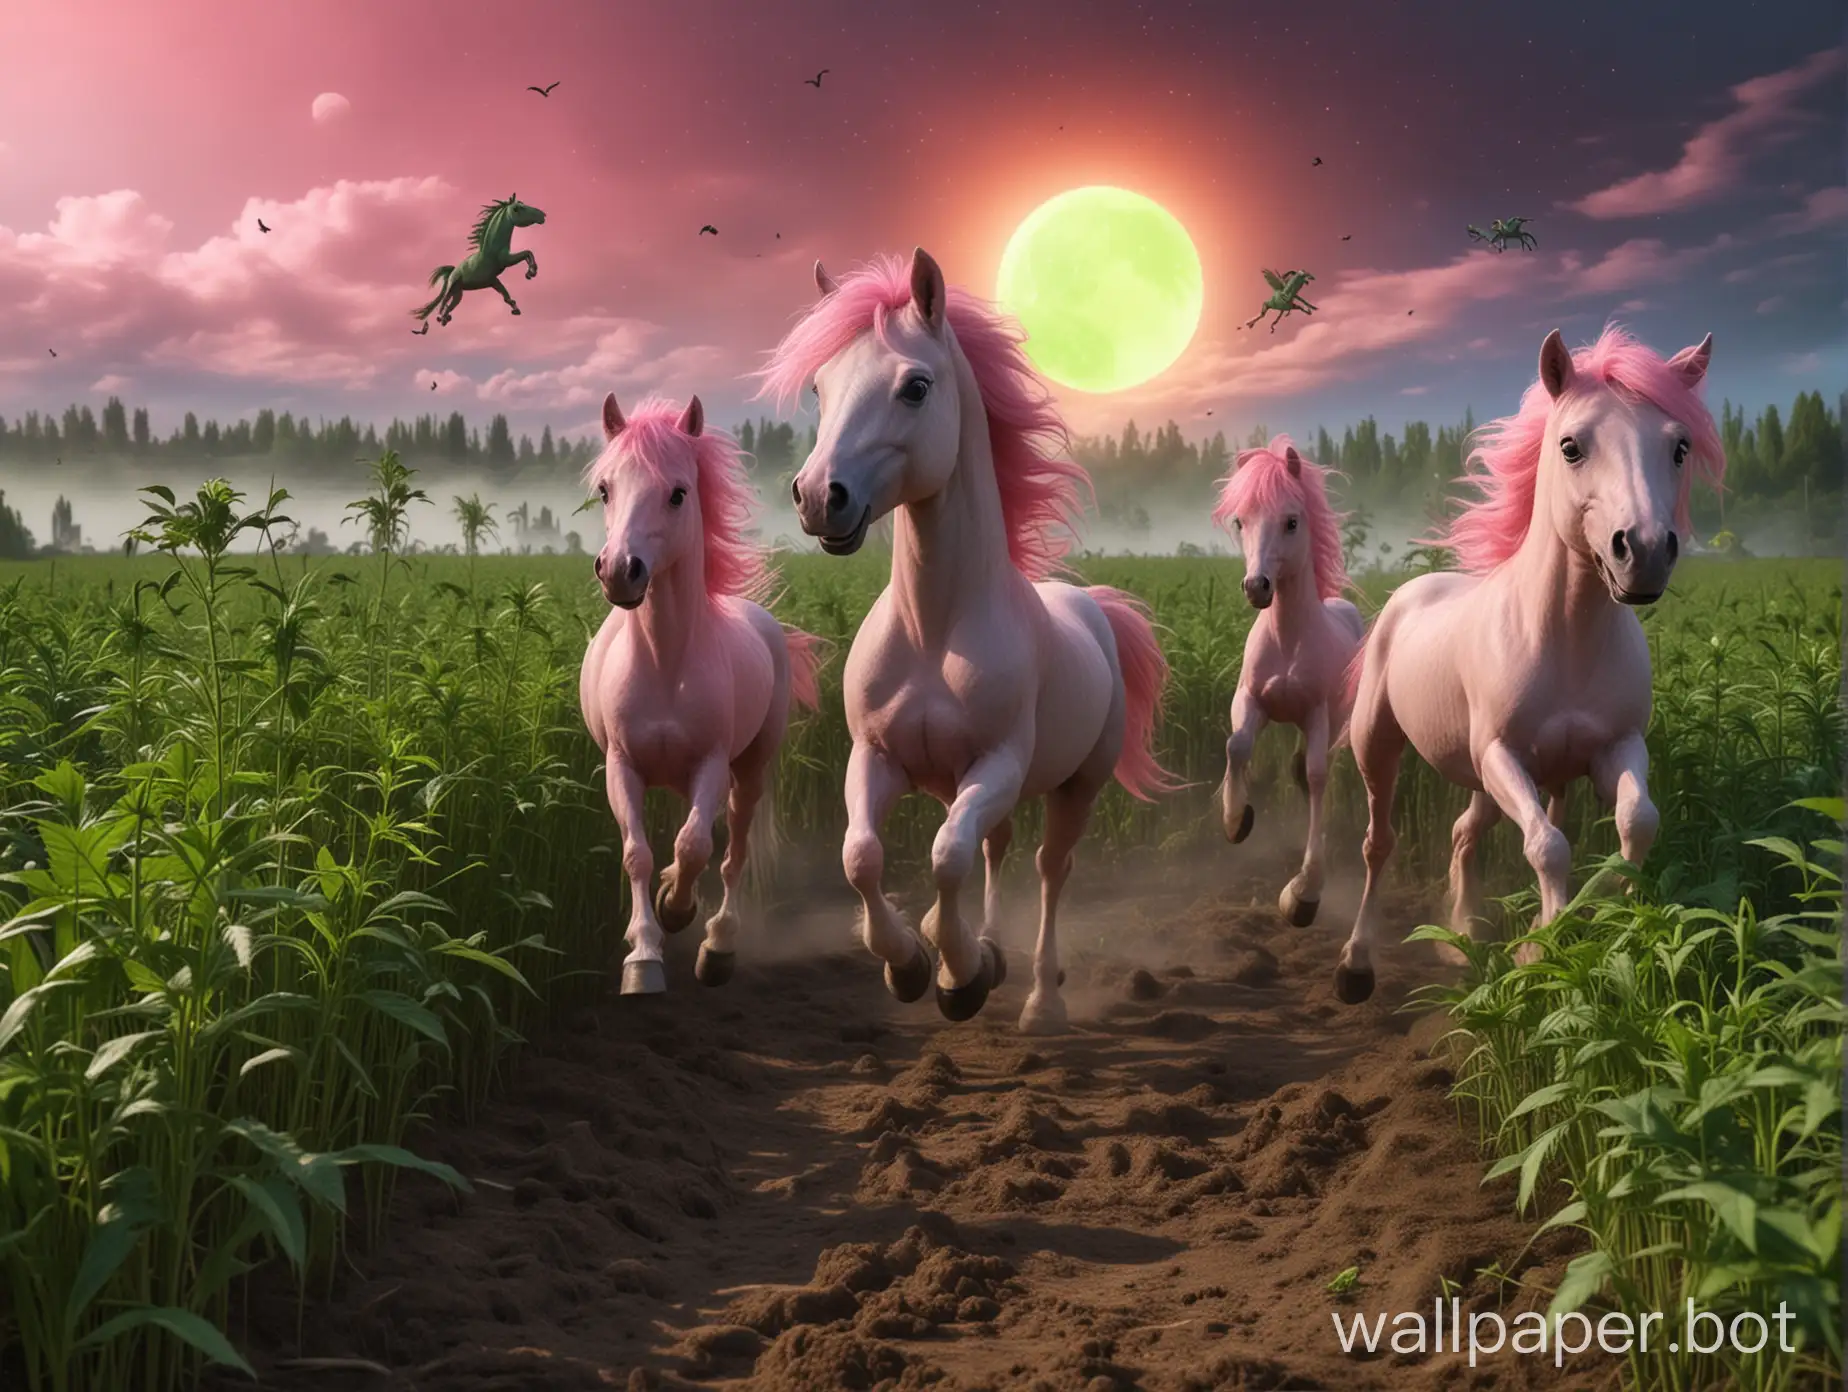 small green aliens with big black eyes run through the hemp field, brightly shines green moon, rainbow in the background, pink fog around, little pink ponies jump across the sky, full size, photorealism